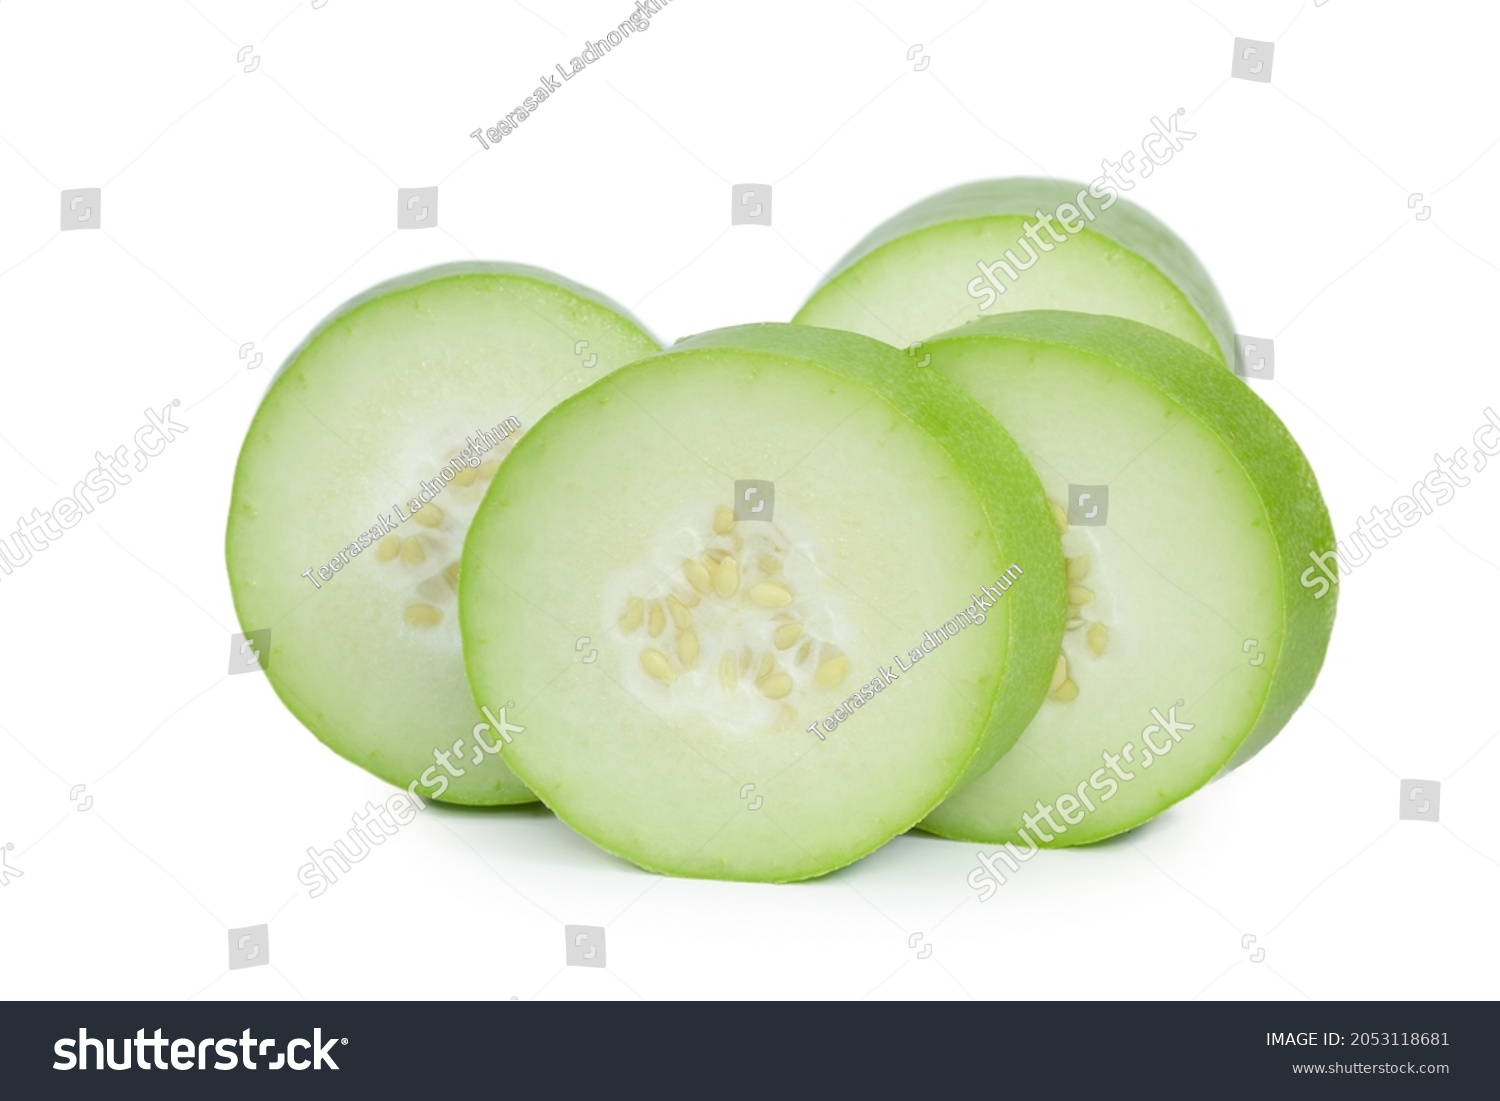 Winter melon isolated on white background. #2053118681